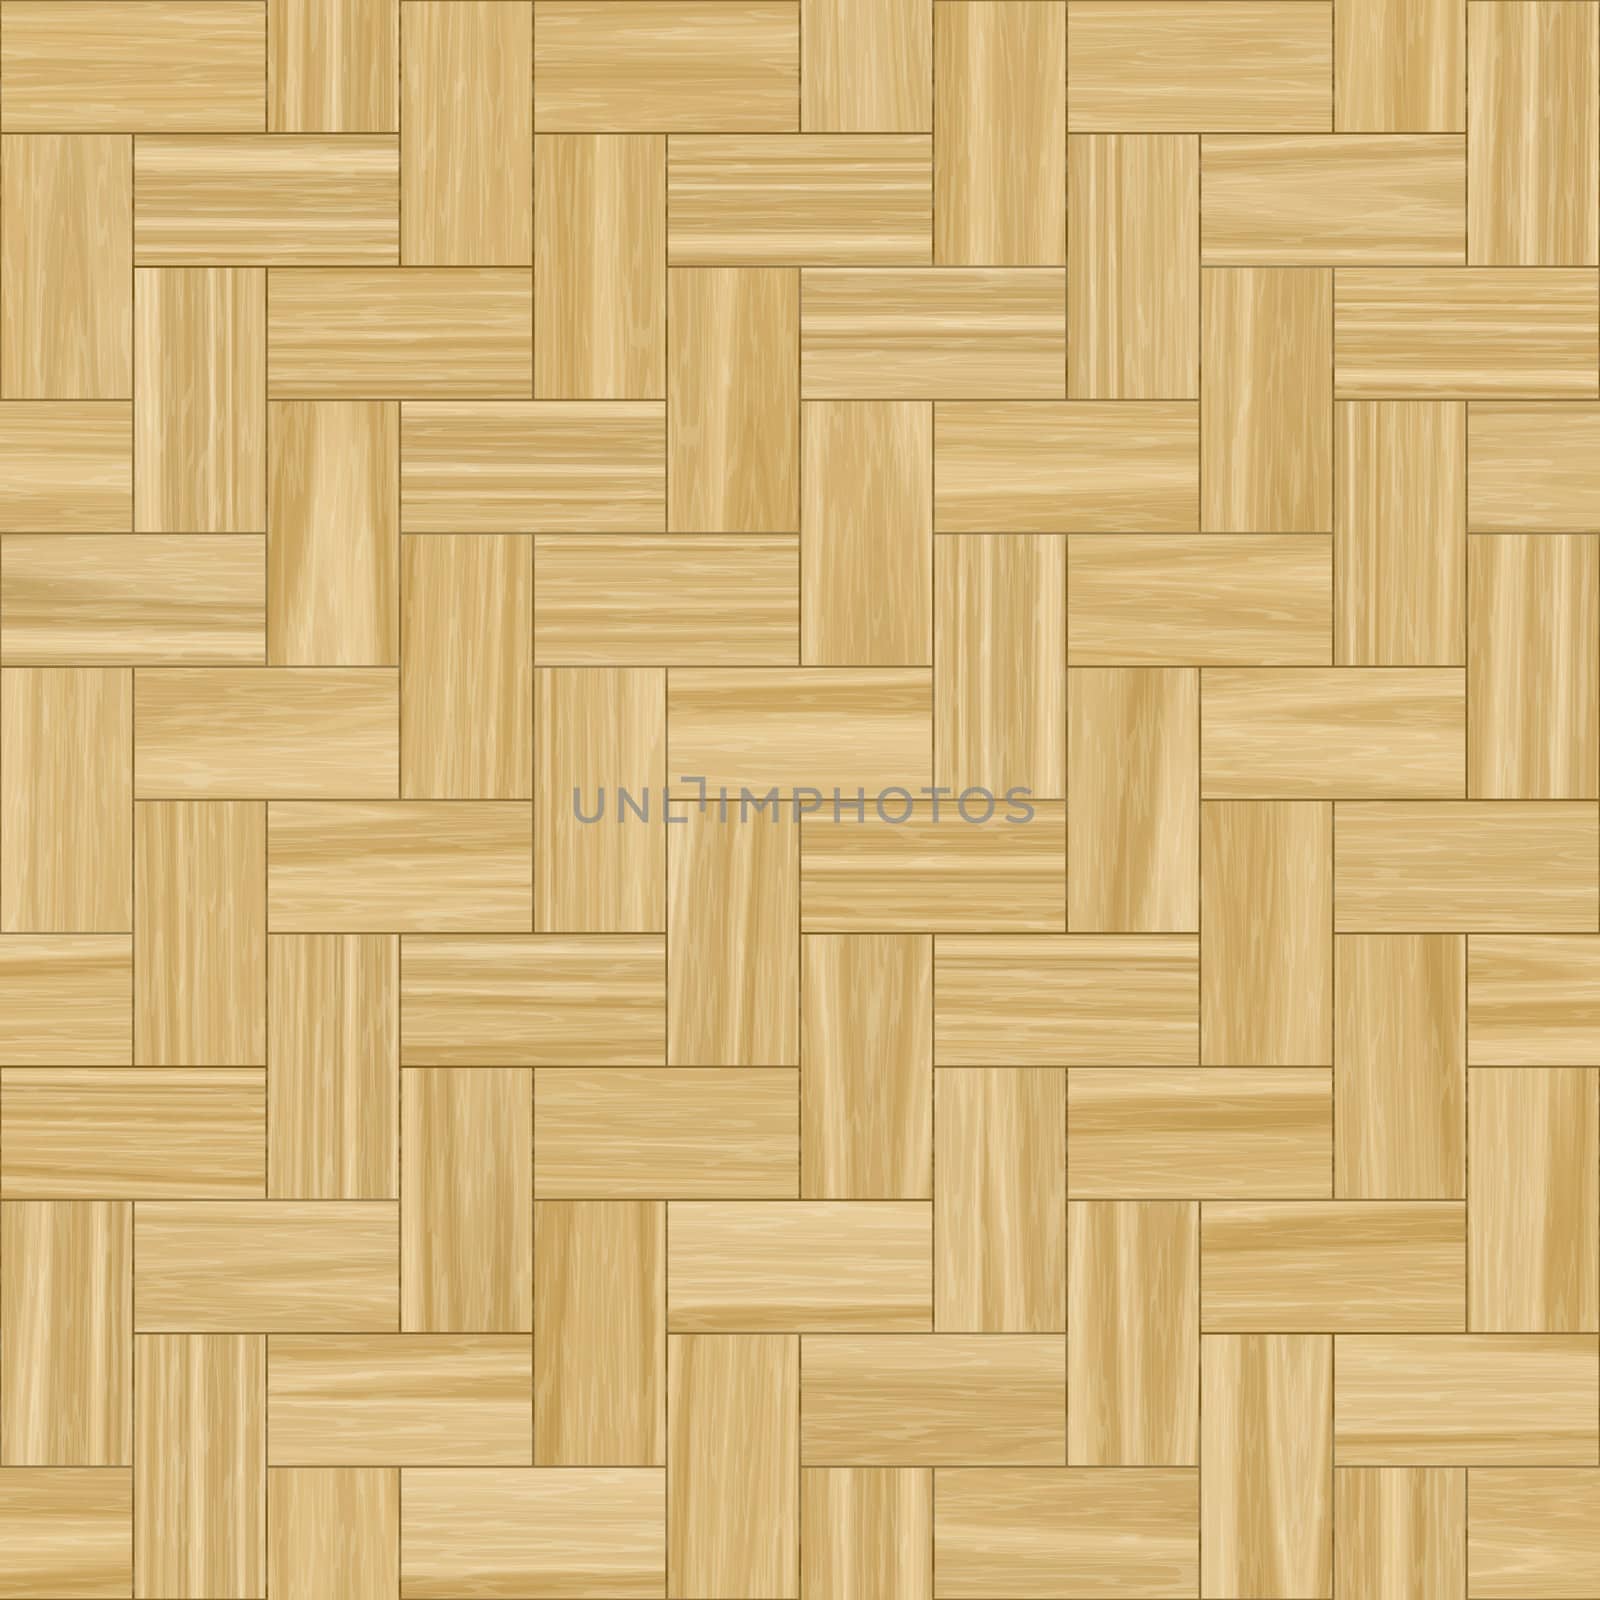 a large background image of parquetry floor